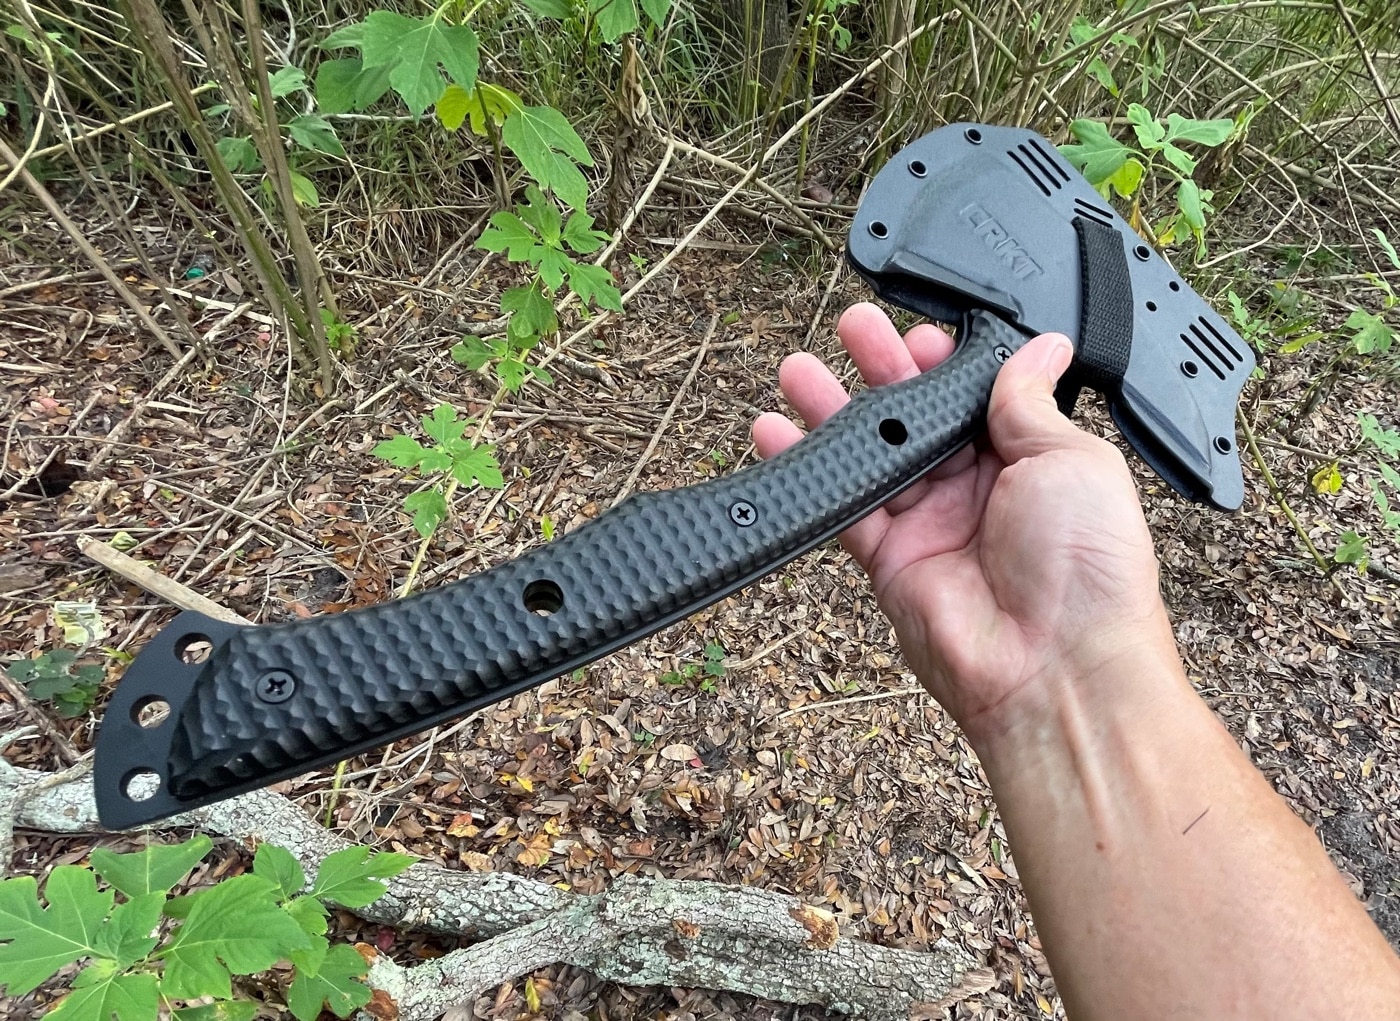 crkt kangee testing in the woods as a survival axe